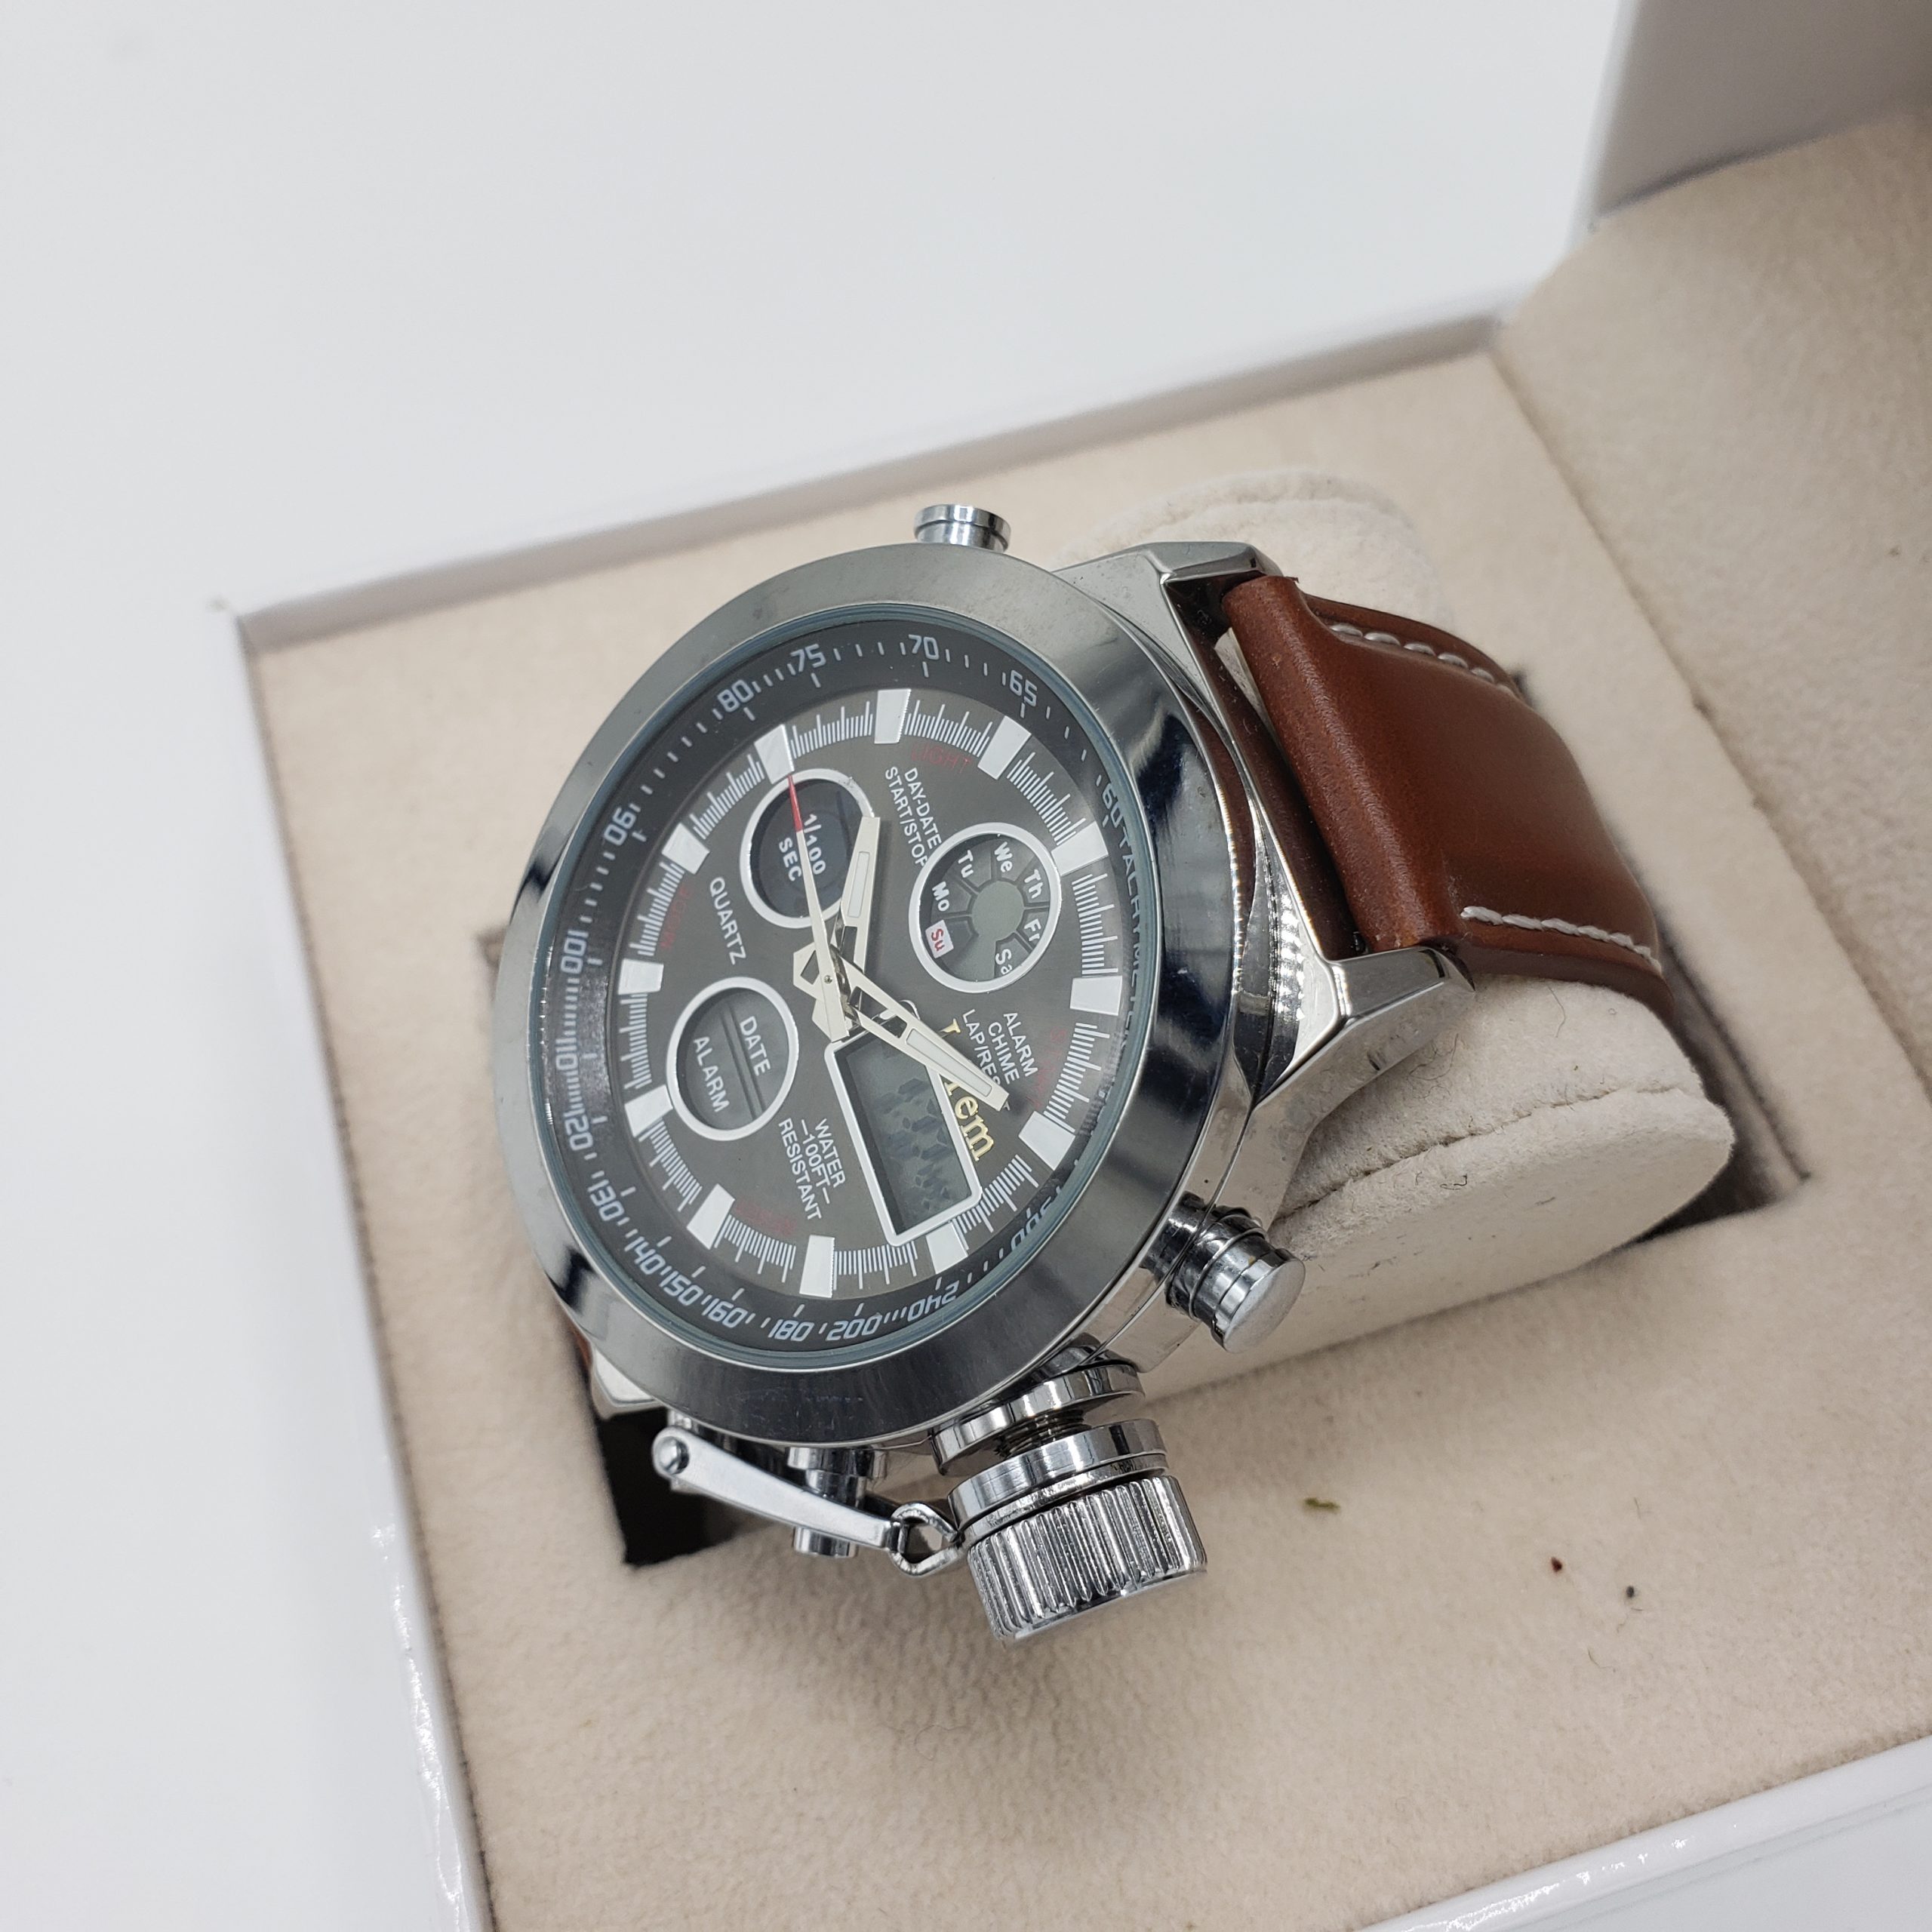 The Time Master I-TW40 Chronograph Watch